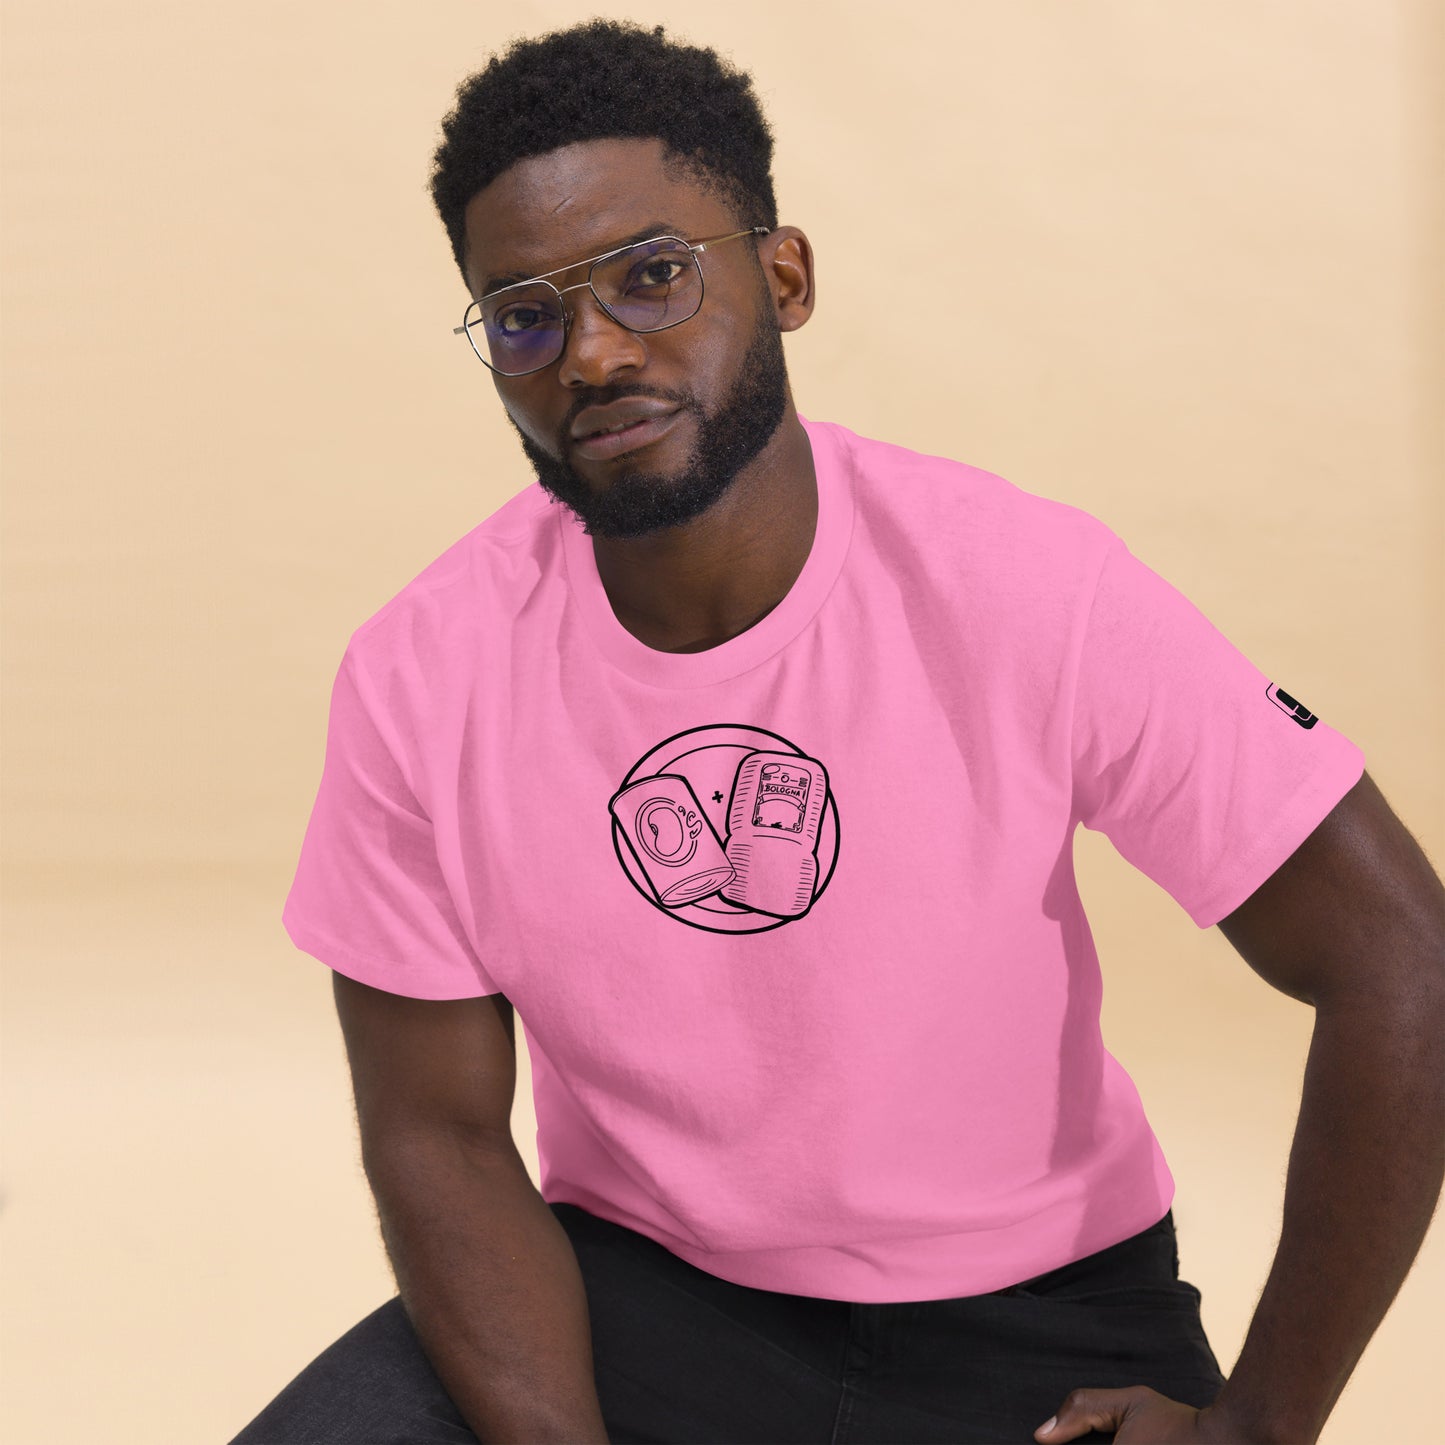  A man sits modeling a bright pink t-shirt featuring a circular emblem in black line art on the chest. The emblem depicts a can of beans and a packet of bologna with a "+" sign between them. He wears glasses and pairs the shirt with dark pants. The t-shirt also includes a small black logo patch on the right sleeve. He poses against a soft beige background, giving the image a relaxed, stylish vibe.